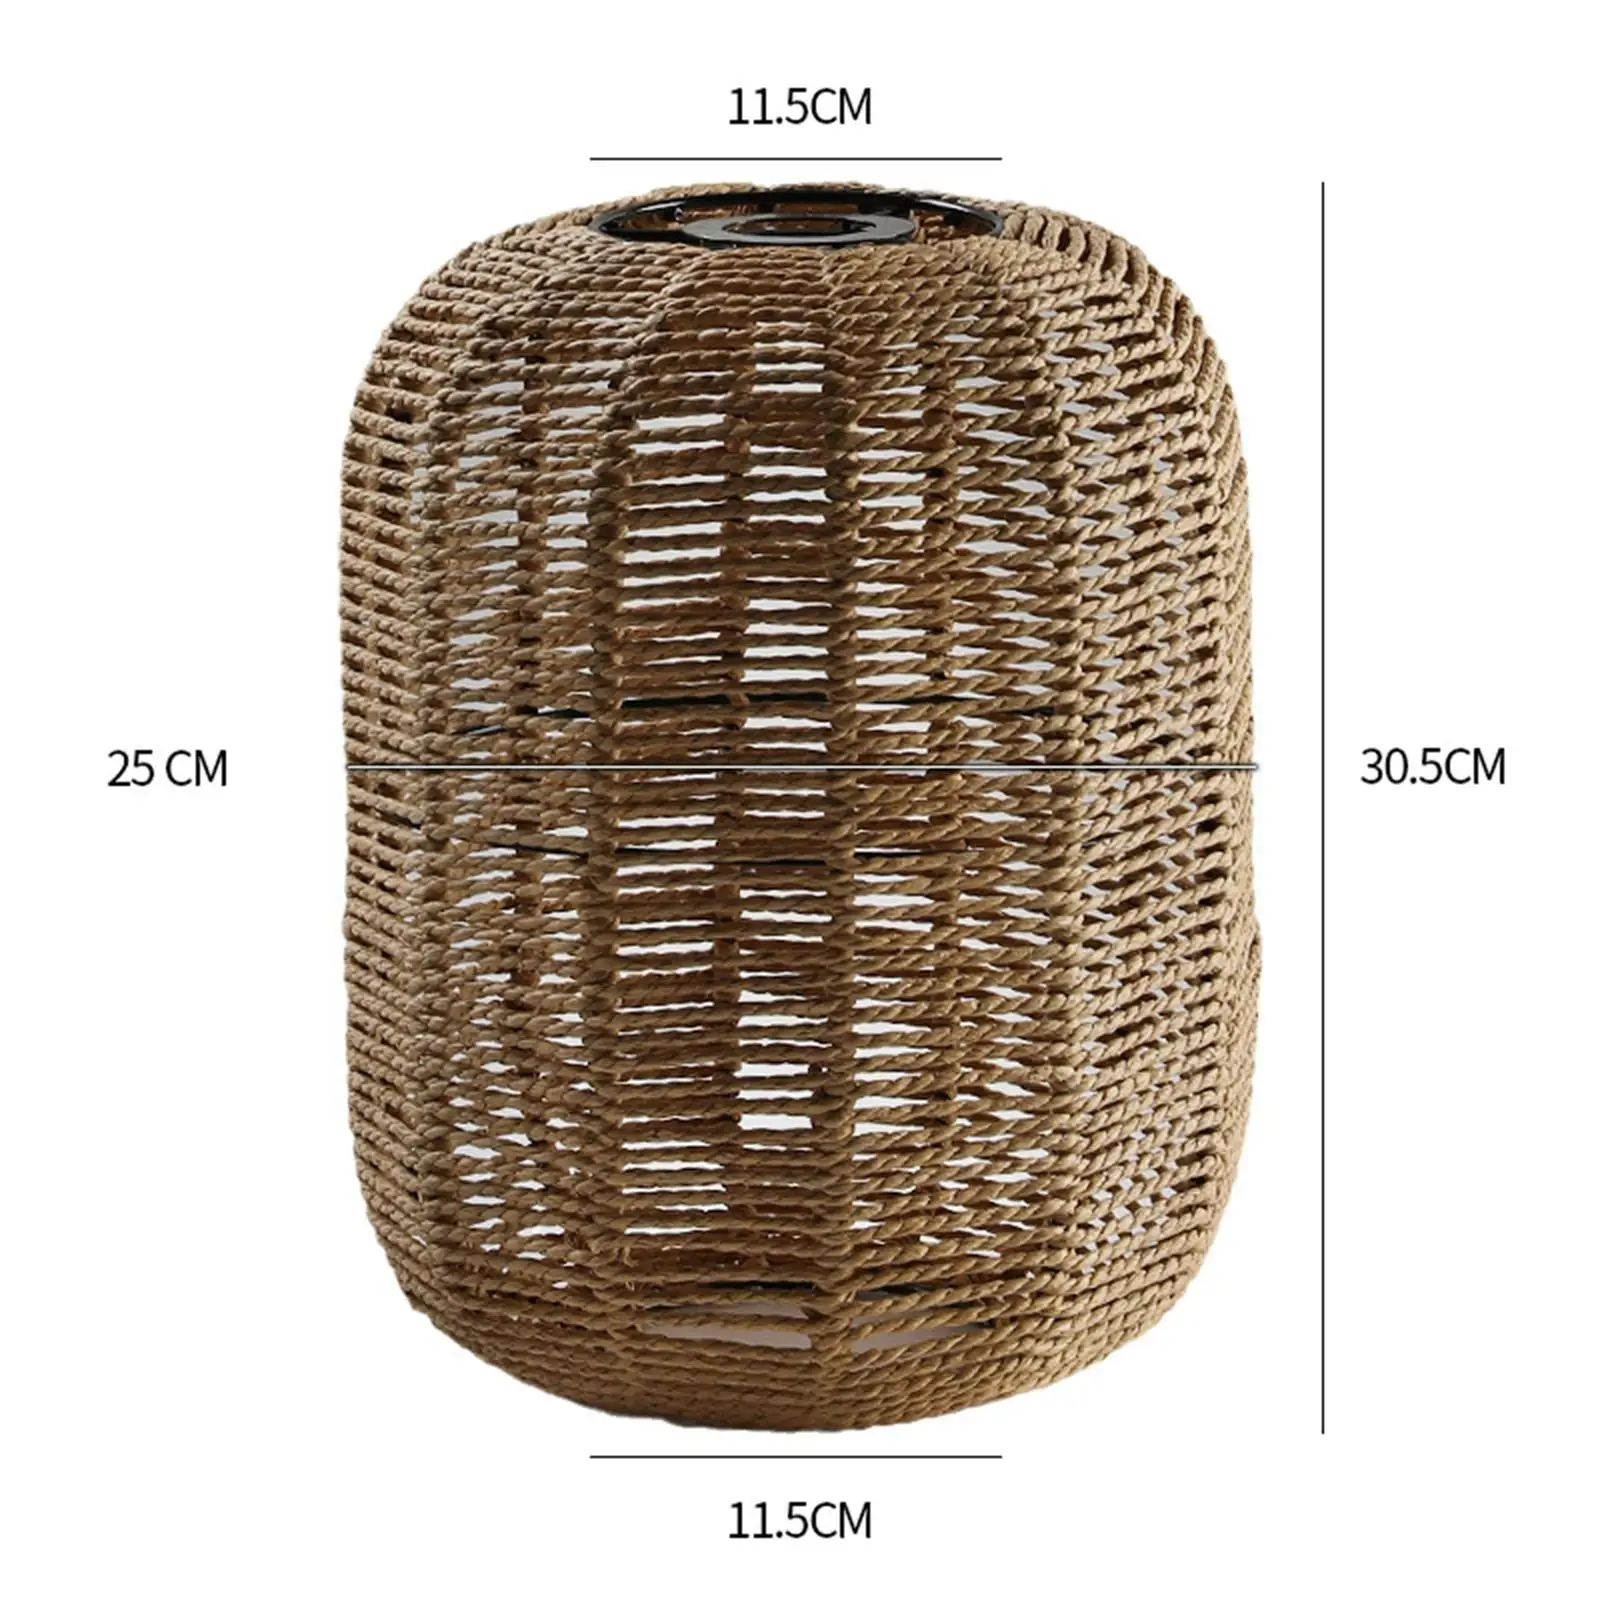 Retro Style Pendant Lamp Shade Woven Hanging Light Rope Fixture Lampshade for Restaurant Hotel Bedroom Dining Room Decor